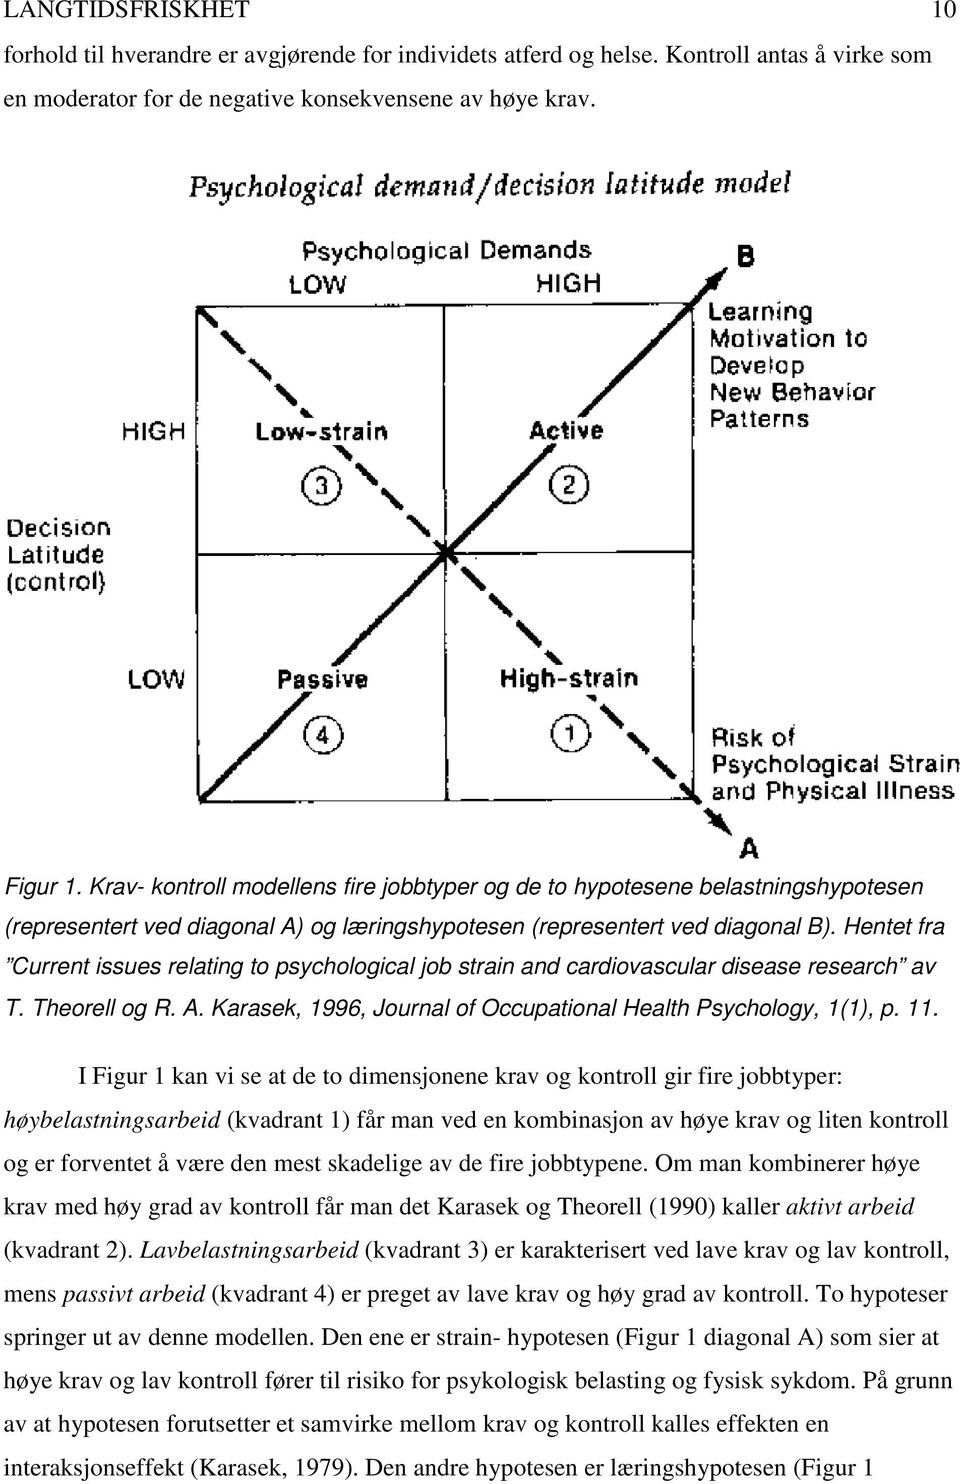 Hentet fra Current issues relating to psychological job strain and cardiovascular disease research av T. Theorell og R. A. Karasek, 1996, Journal of Occupational Health Psychology, 1(1), p. 11.